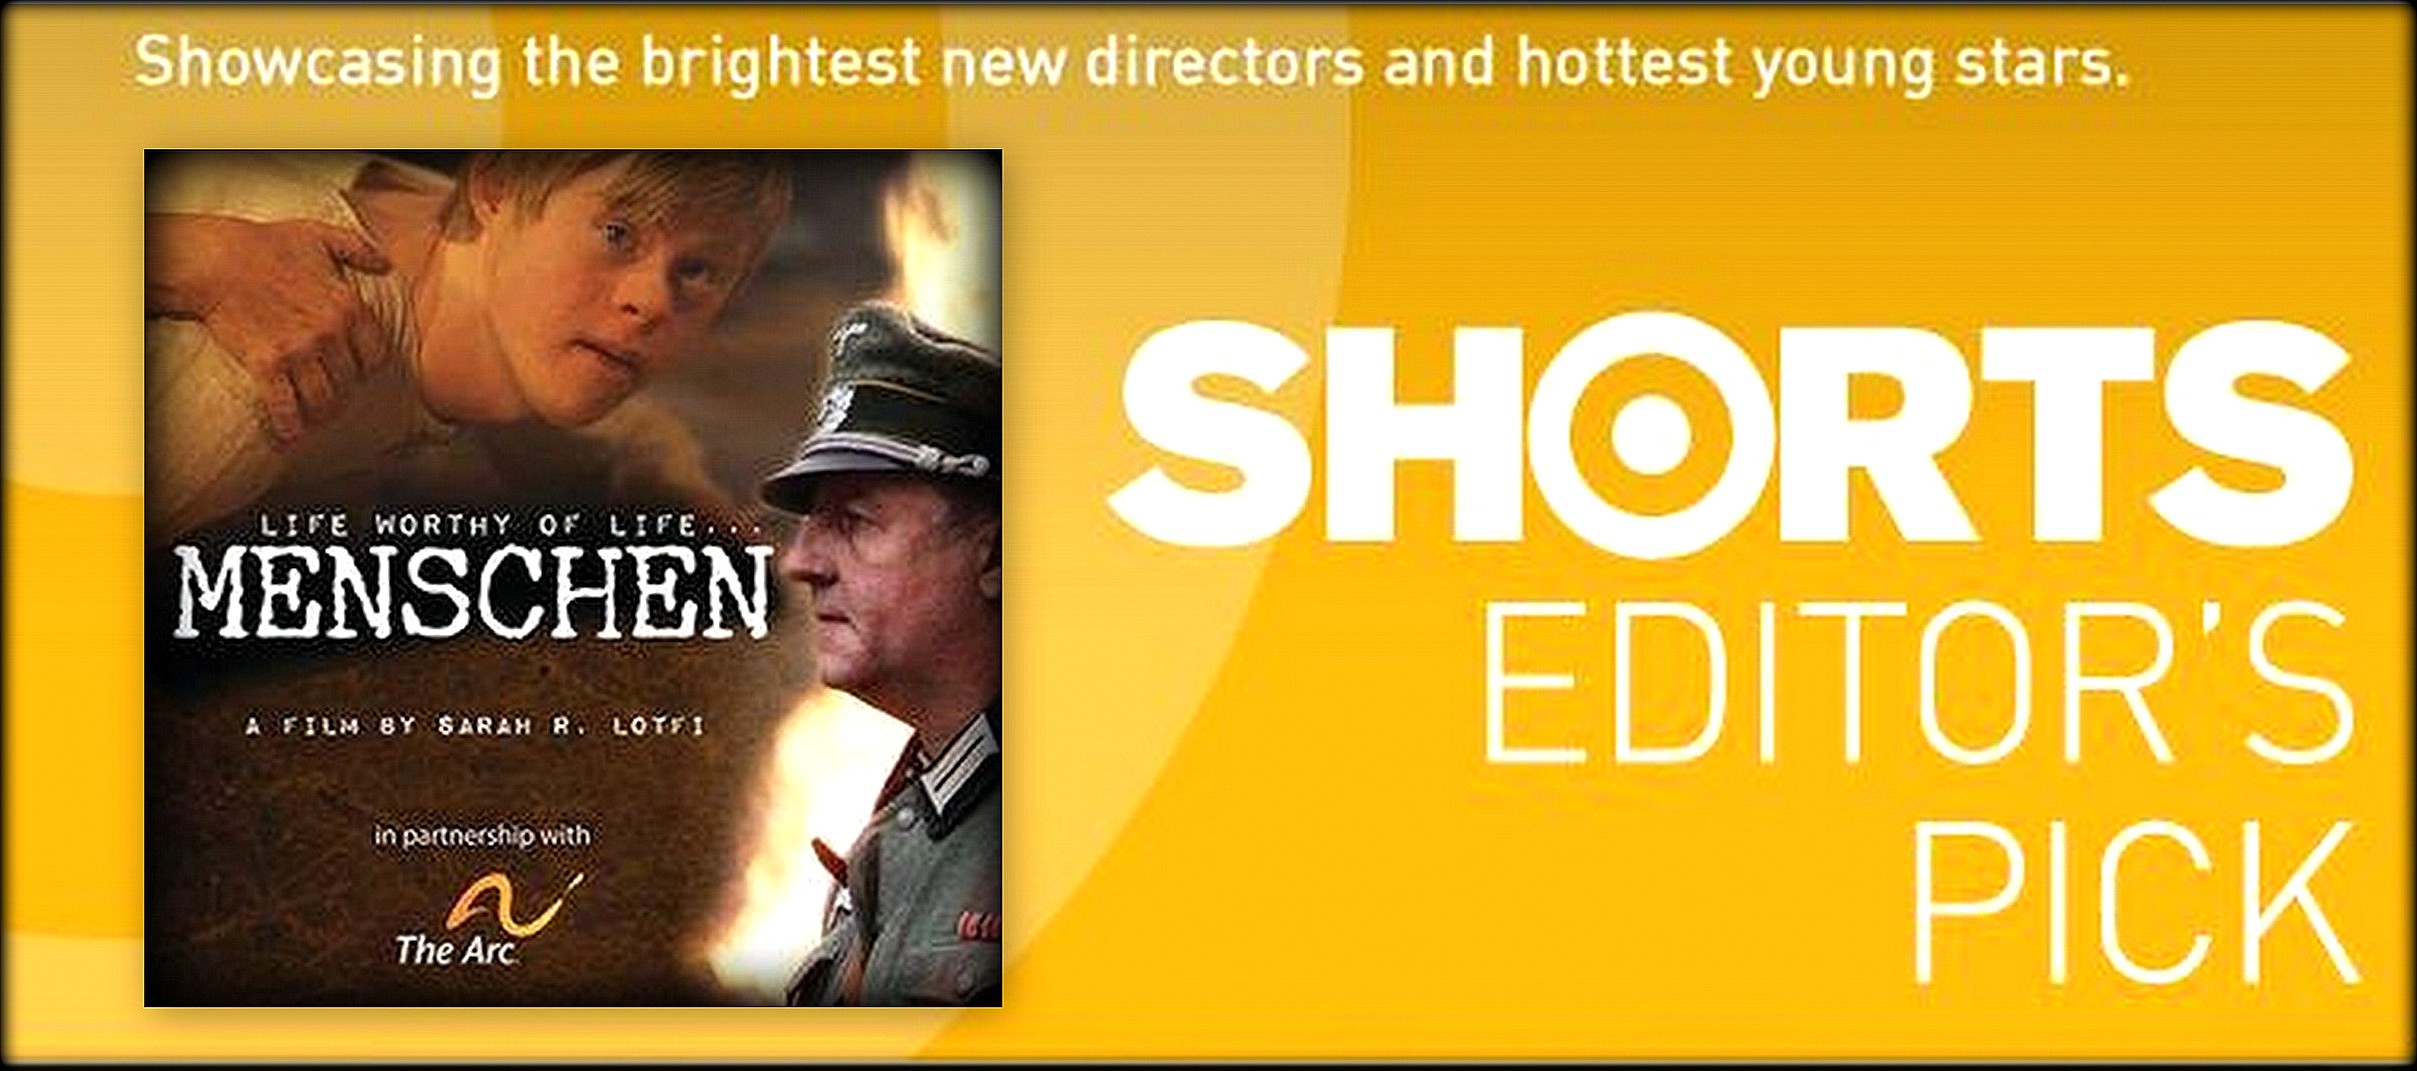 Menschen available on Shorts HD cable channel in US and Europe ~ Nov/Dec 2015 Visit http://us.shorts.tv/epglive.php (US) or http://eu.shorts.tv/epglive.php (EUROPE) and Search 'menschen' under your timezone to find showtimes! (Dec 1, 2015)